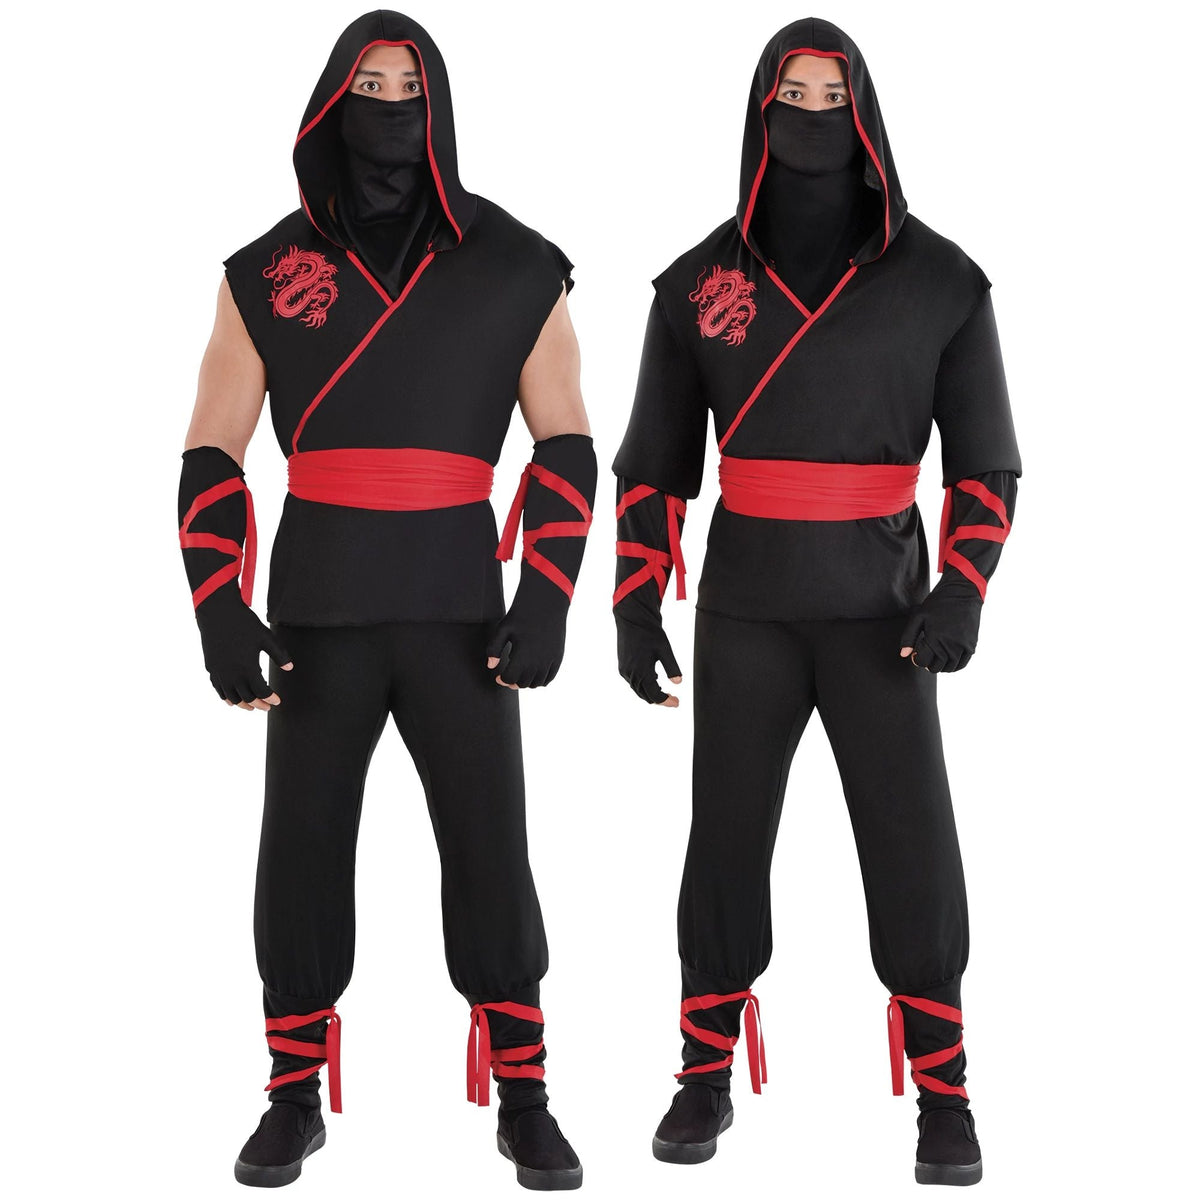 HALLOWEEN COSTUME CO. Costumes Ninja Blood Dragon Assassin Costume for Adults, Black and Red Shirt 192937396551